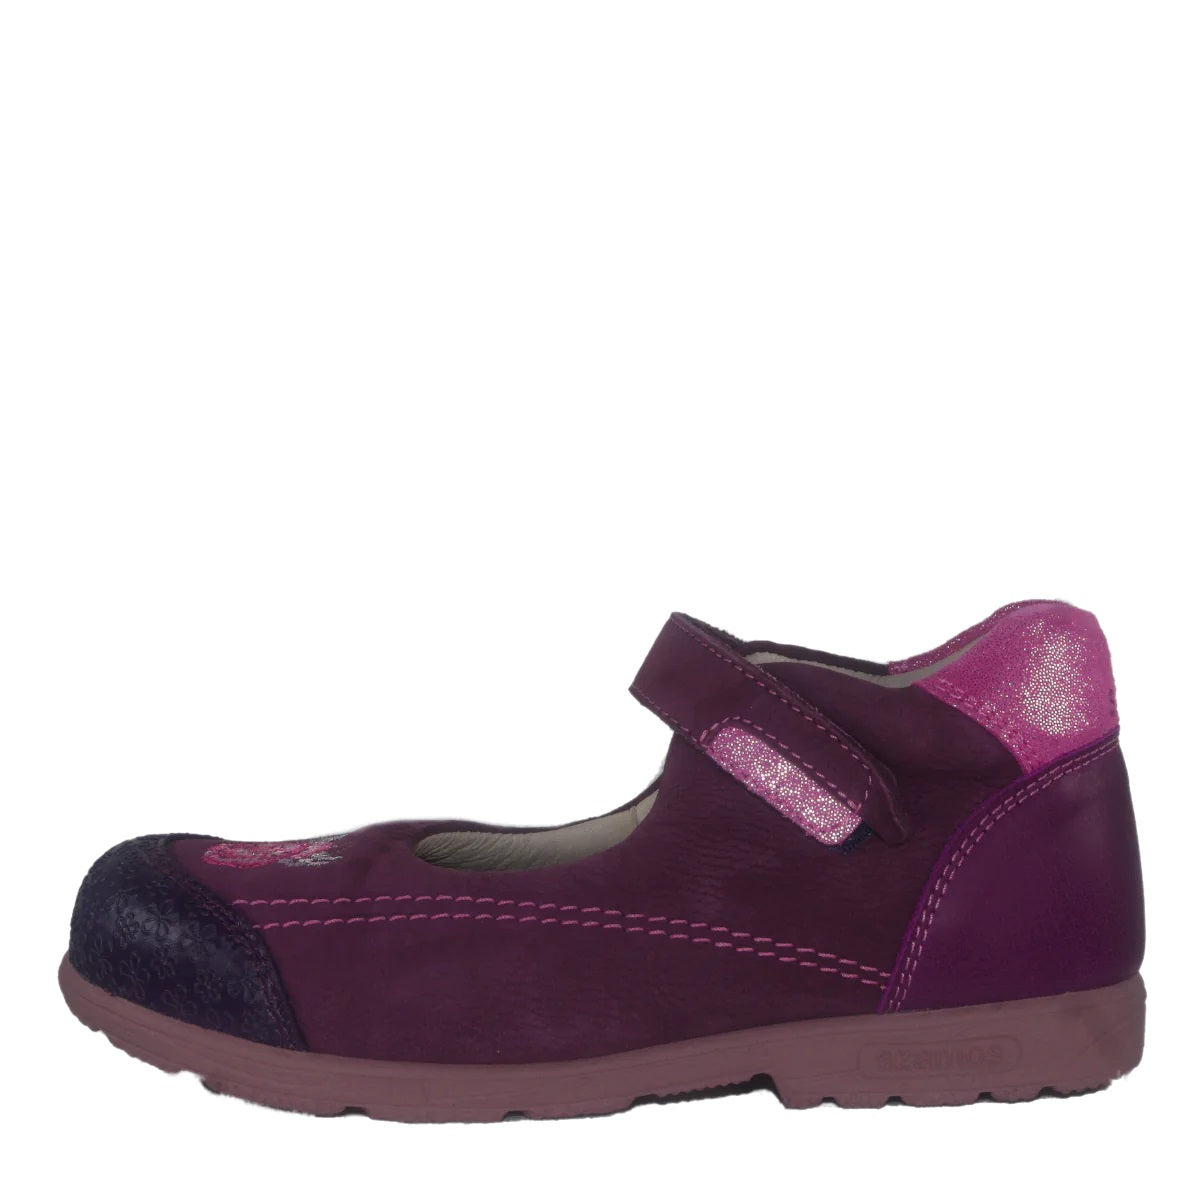 Szamos kid girl supinated dress shoes in burgundy color and pink details with velcro strap little kid/big kid size